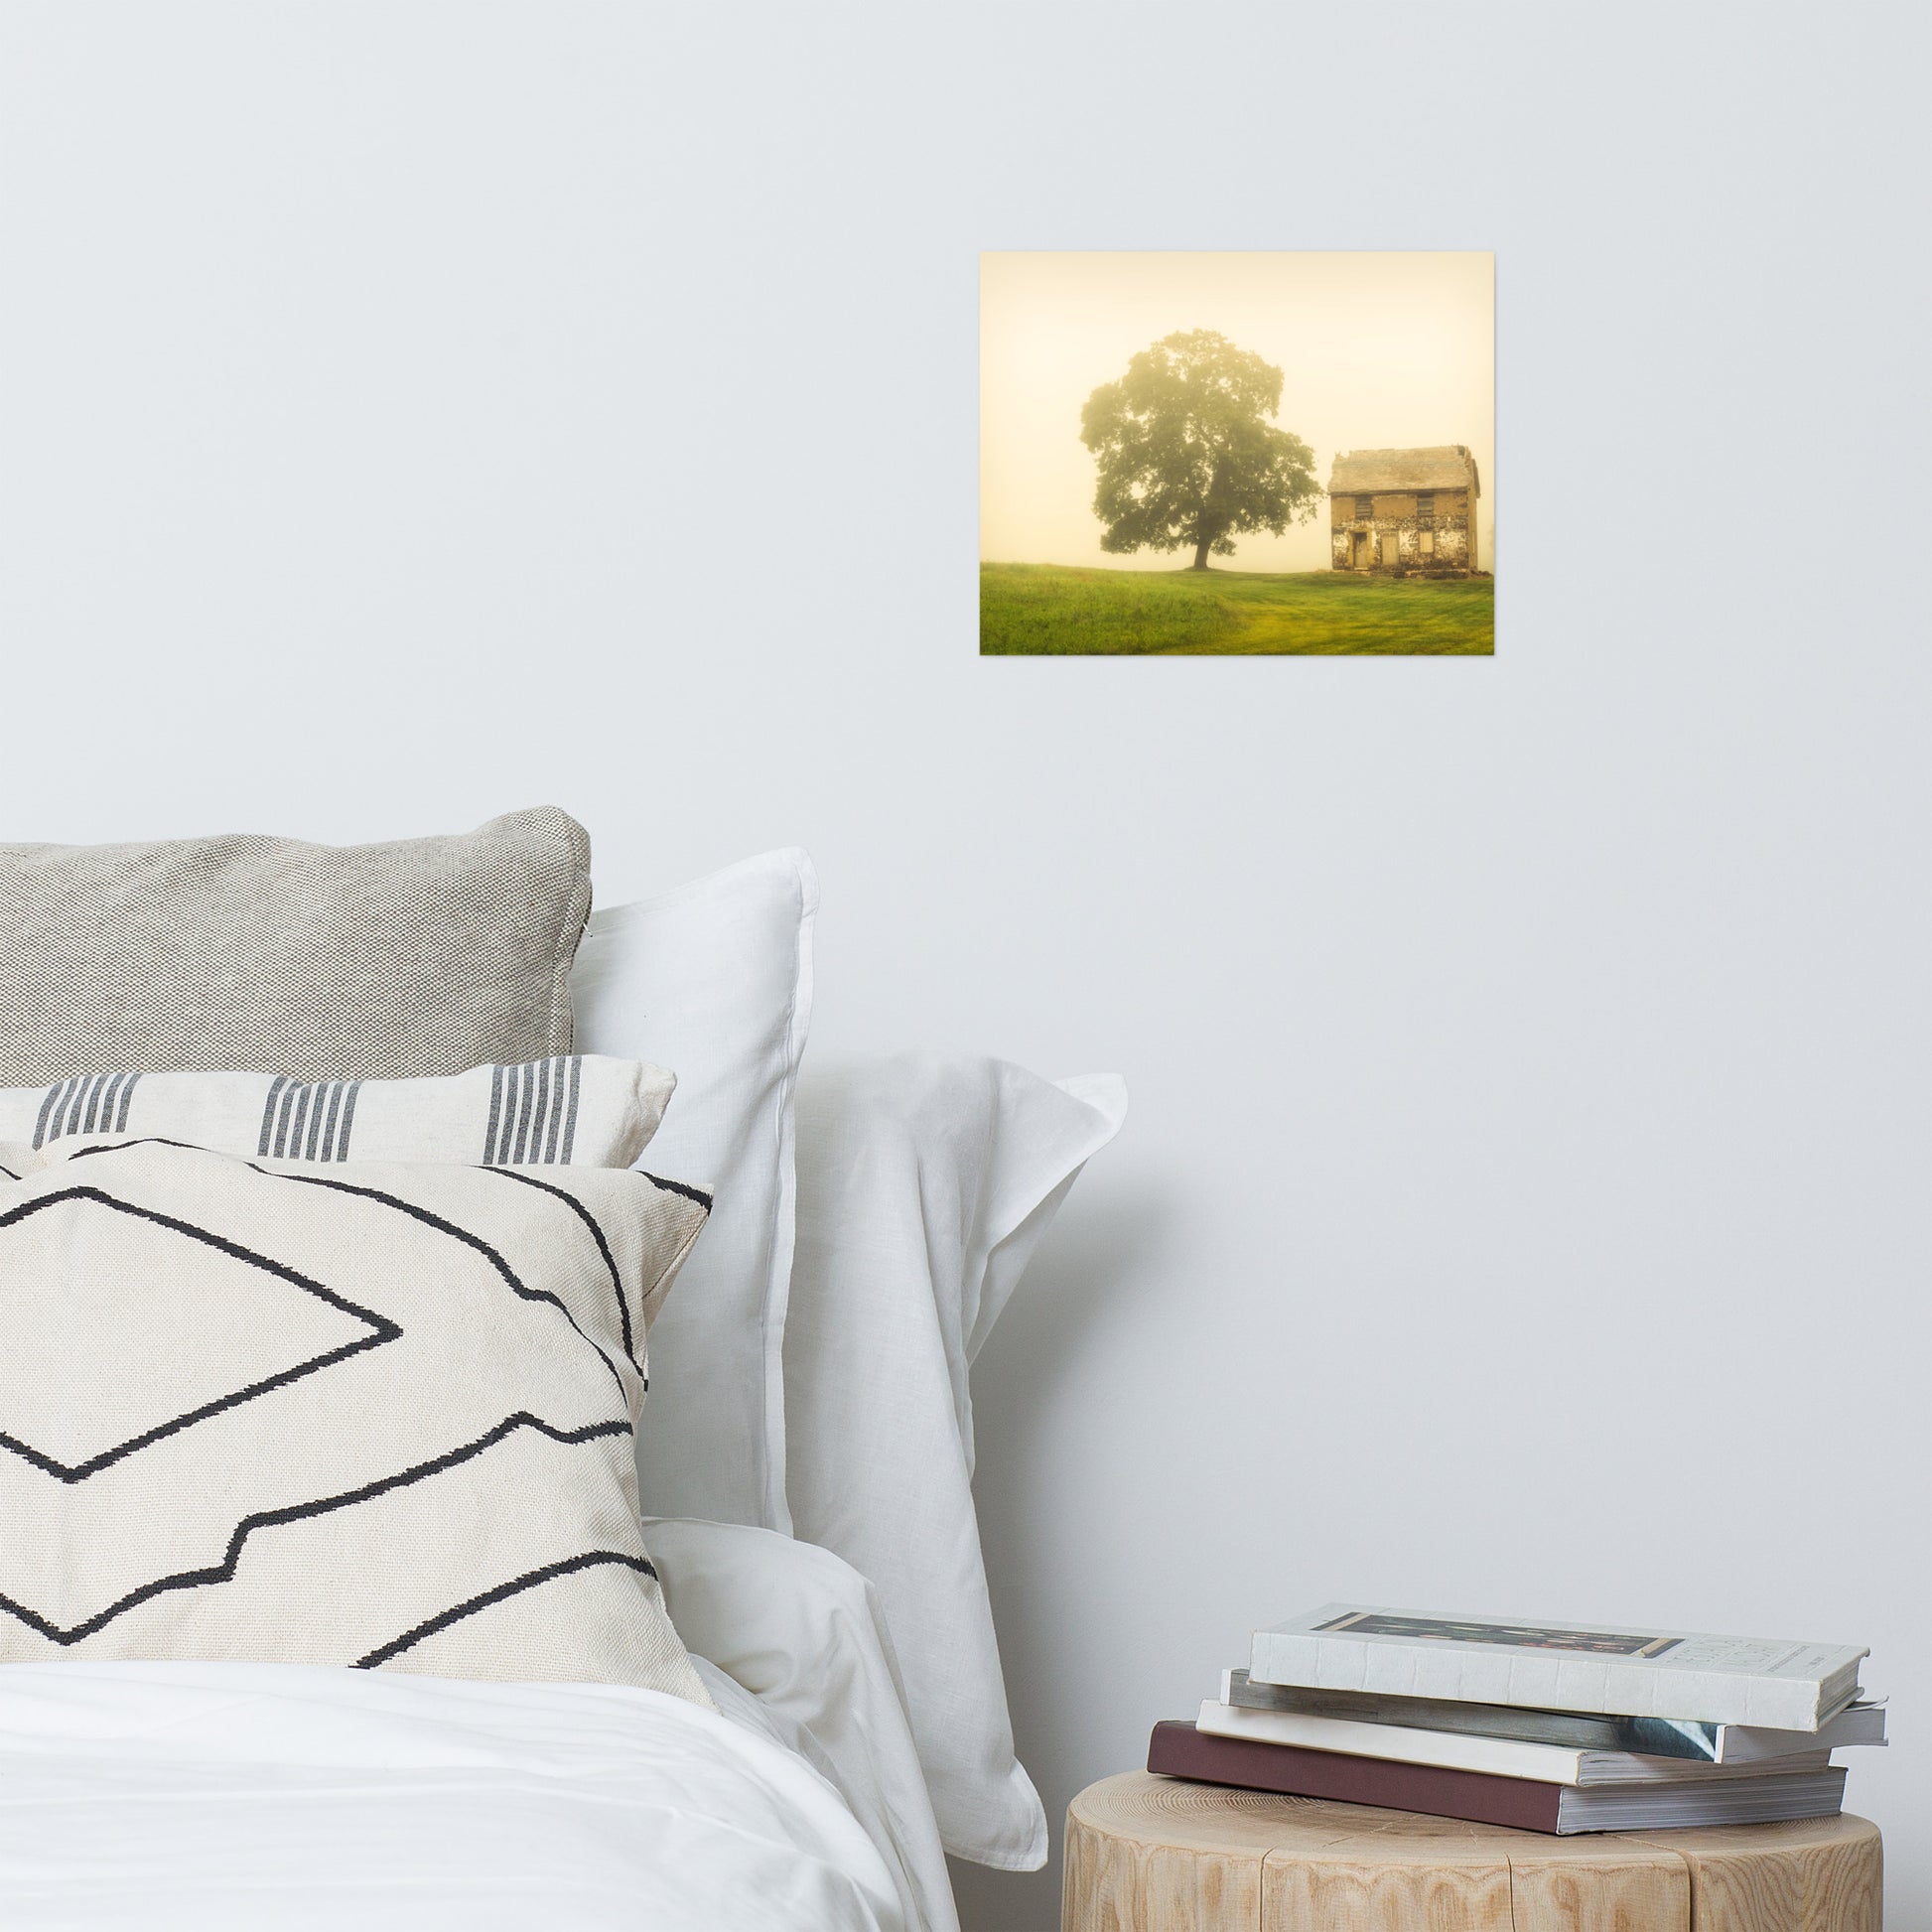 Bedroom Farmhouse Wall Decor: Old Farmhouse in Foggy Meadow Rustic - Rural / Country Style Landscape / Nature Photograph Loose / Unframed / Frameless / Frameable Wall Art Print - Artwork